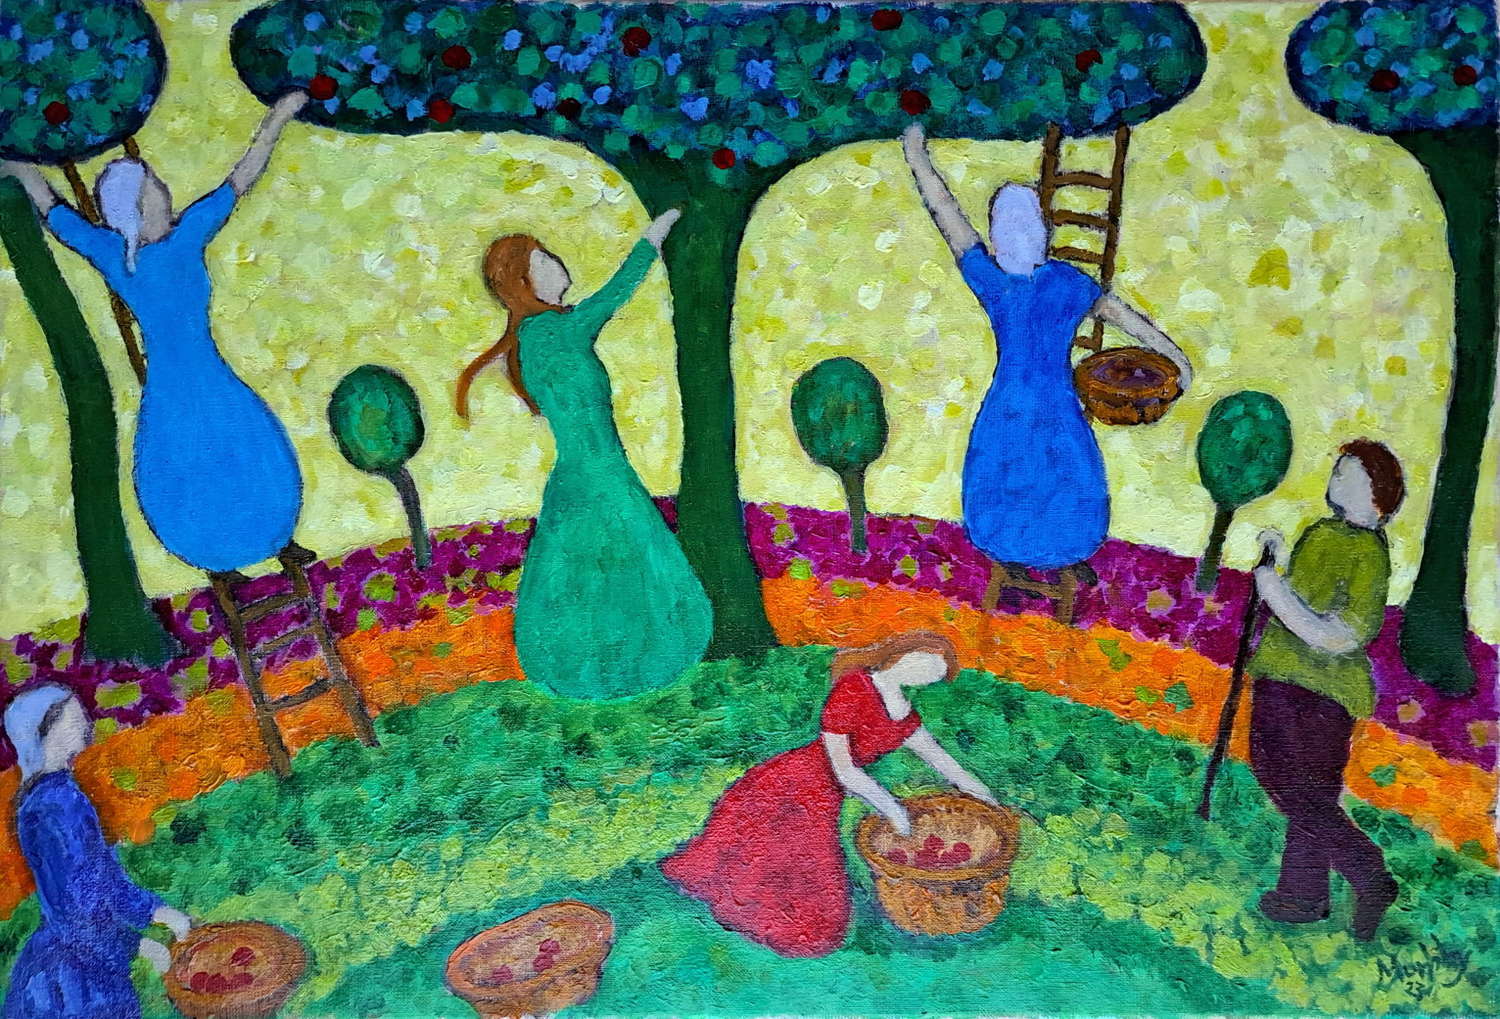 Anthony Murphy.  The Apple Pickers.